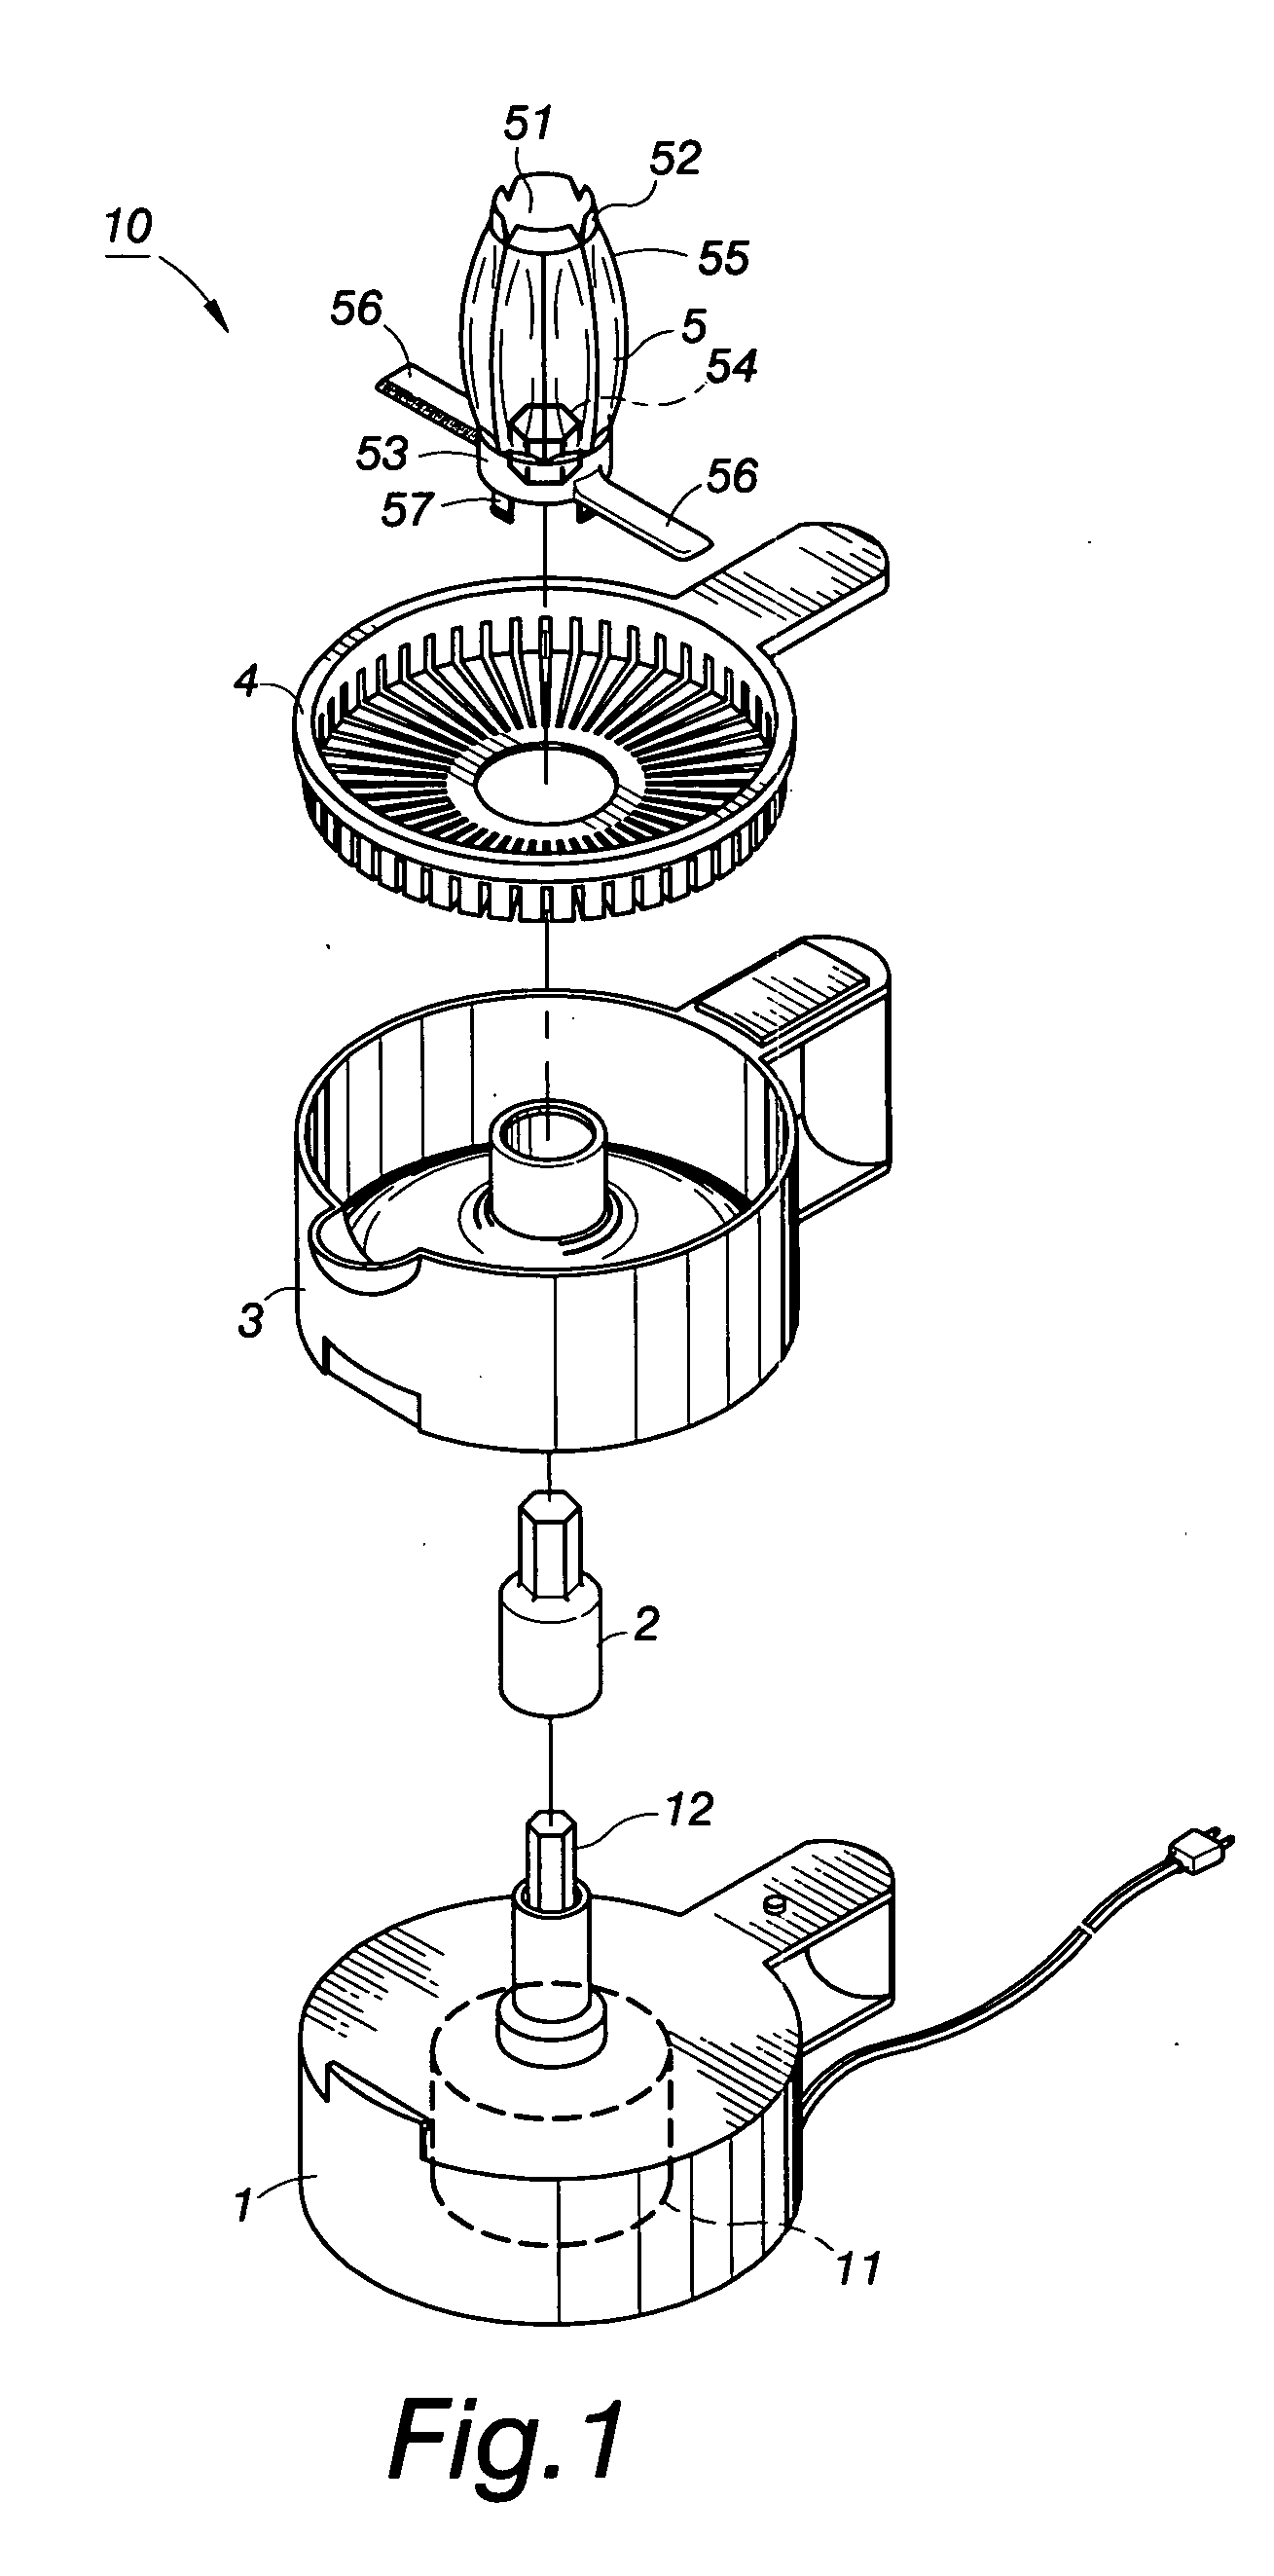 Reamer structure of a juicer